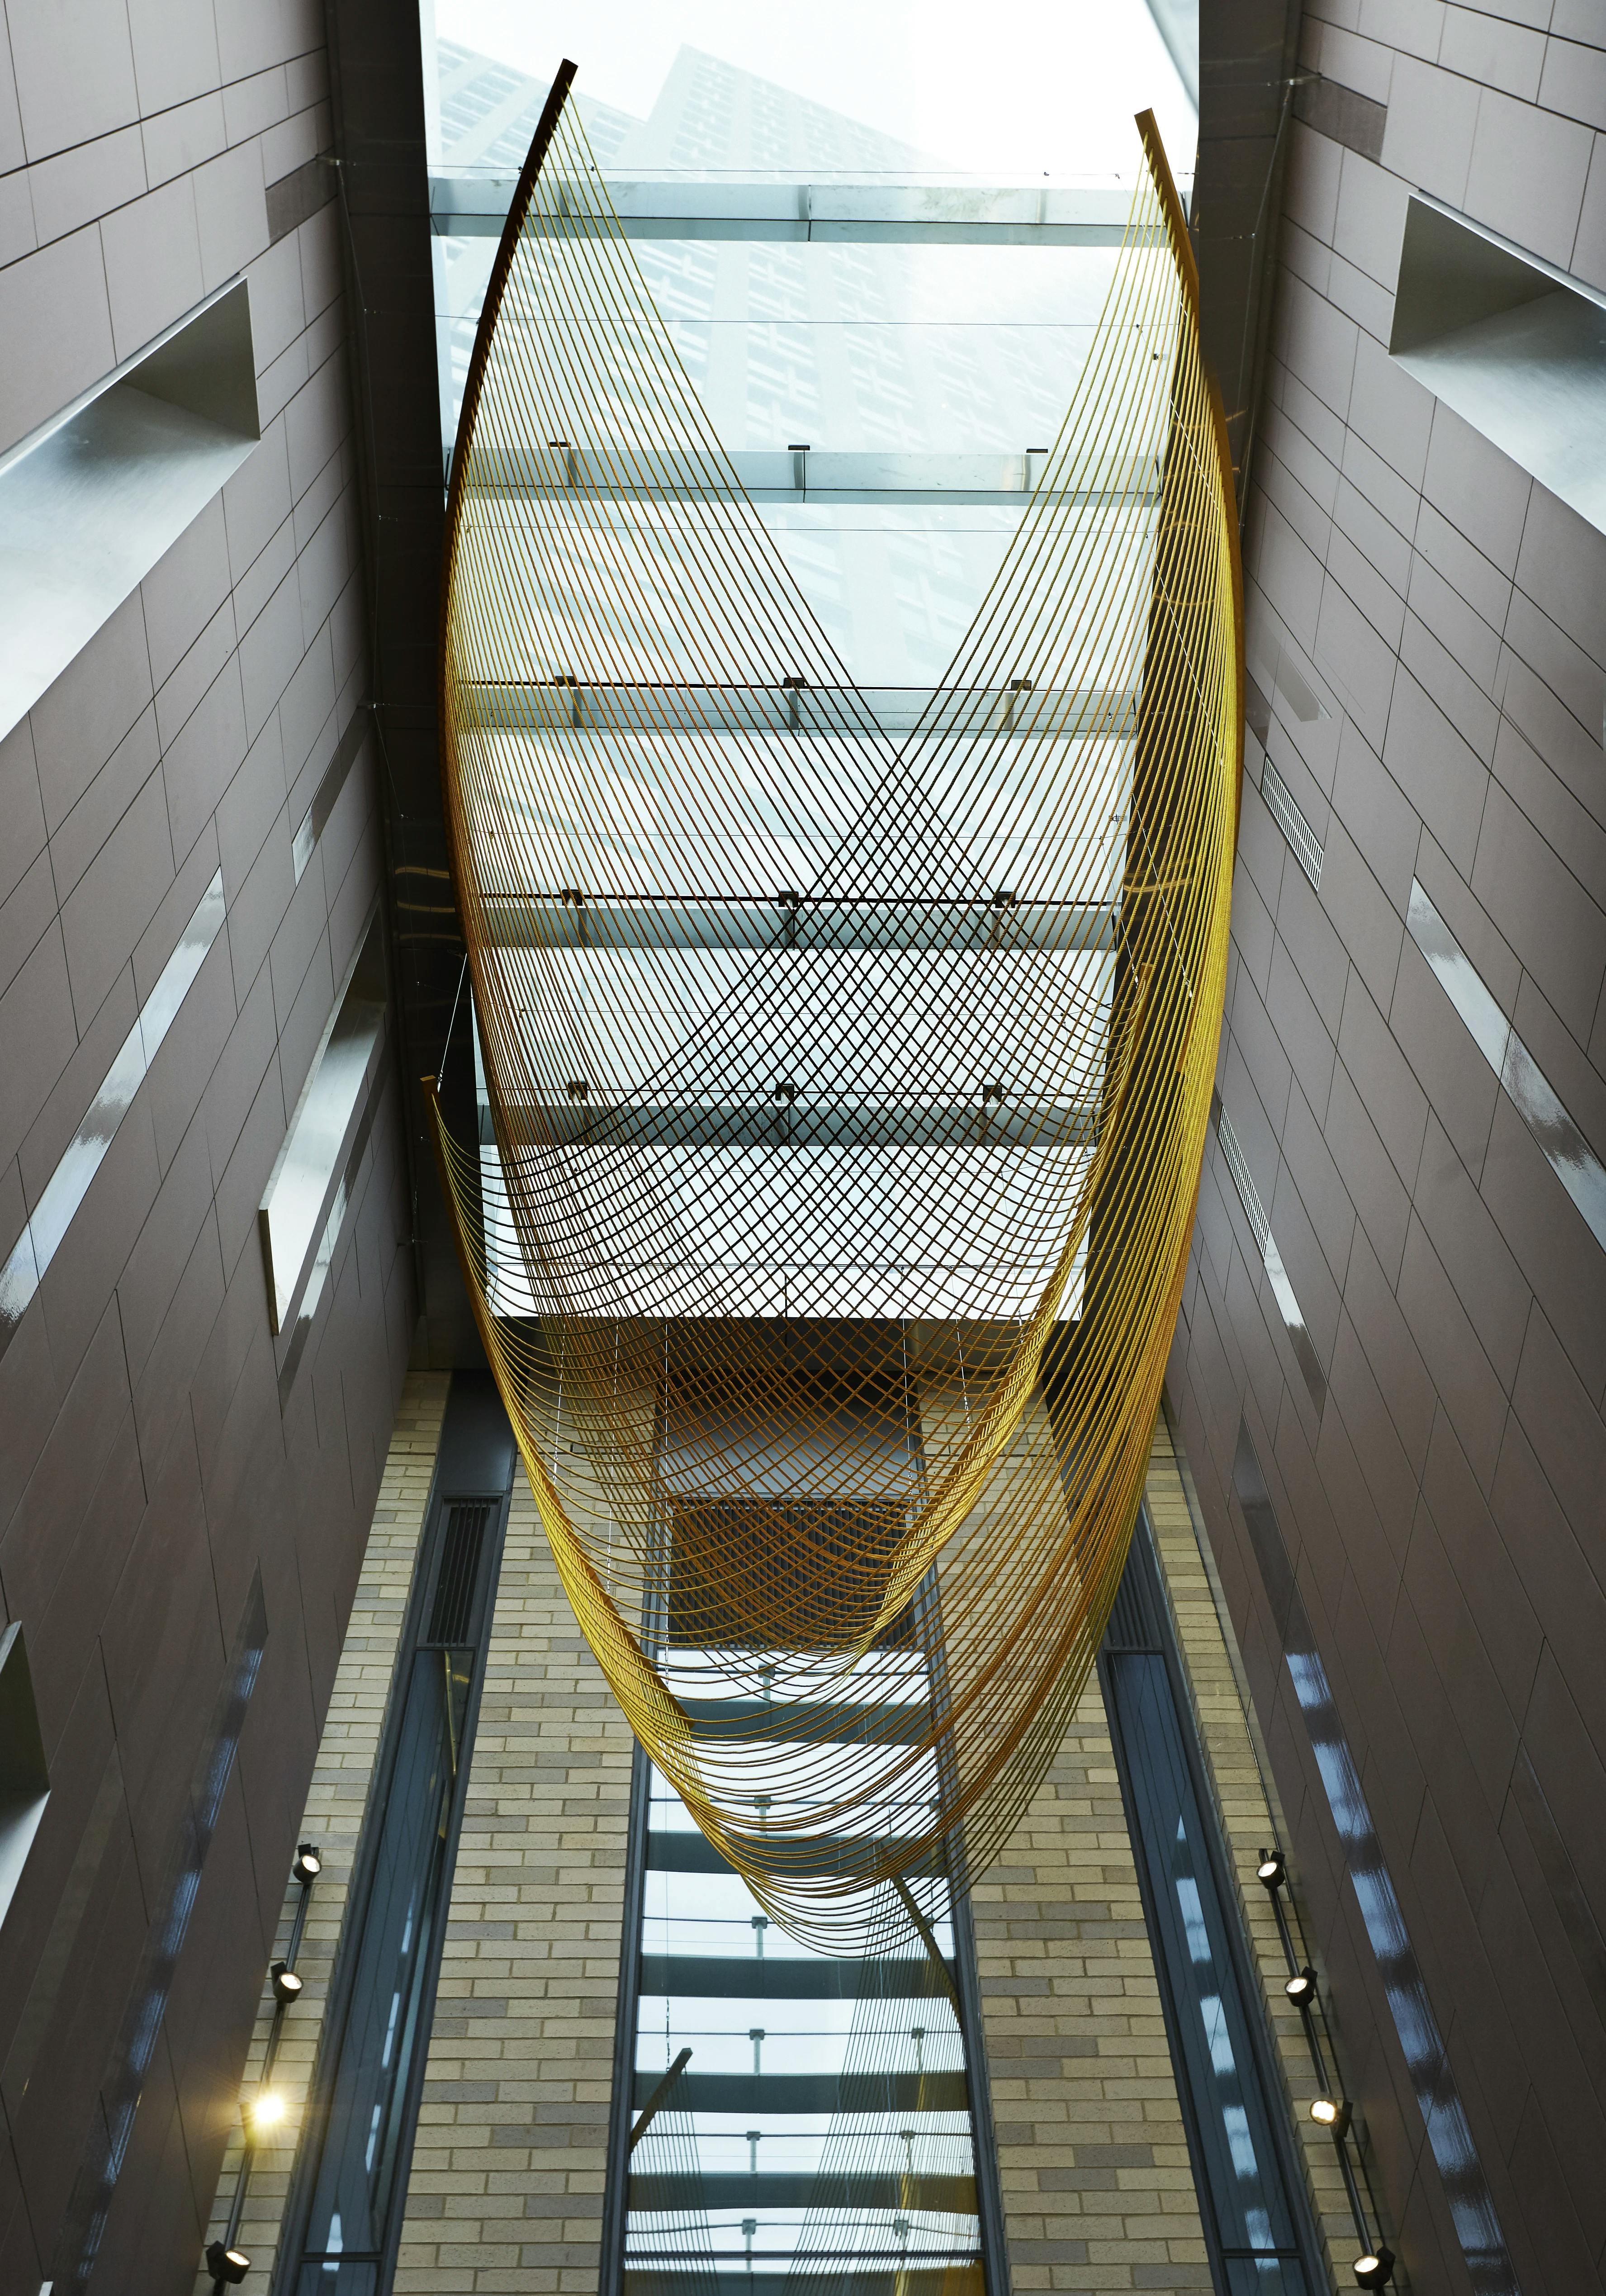 Large, site-specific installation of golden rope and steel by artist Rachel Mica Weiss suspended in the lobby of a modern building.